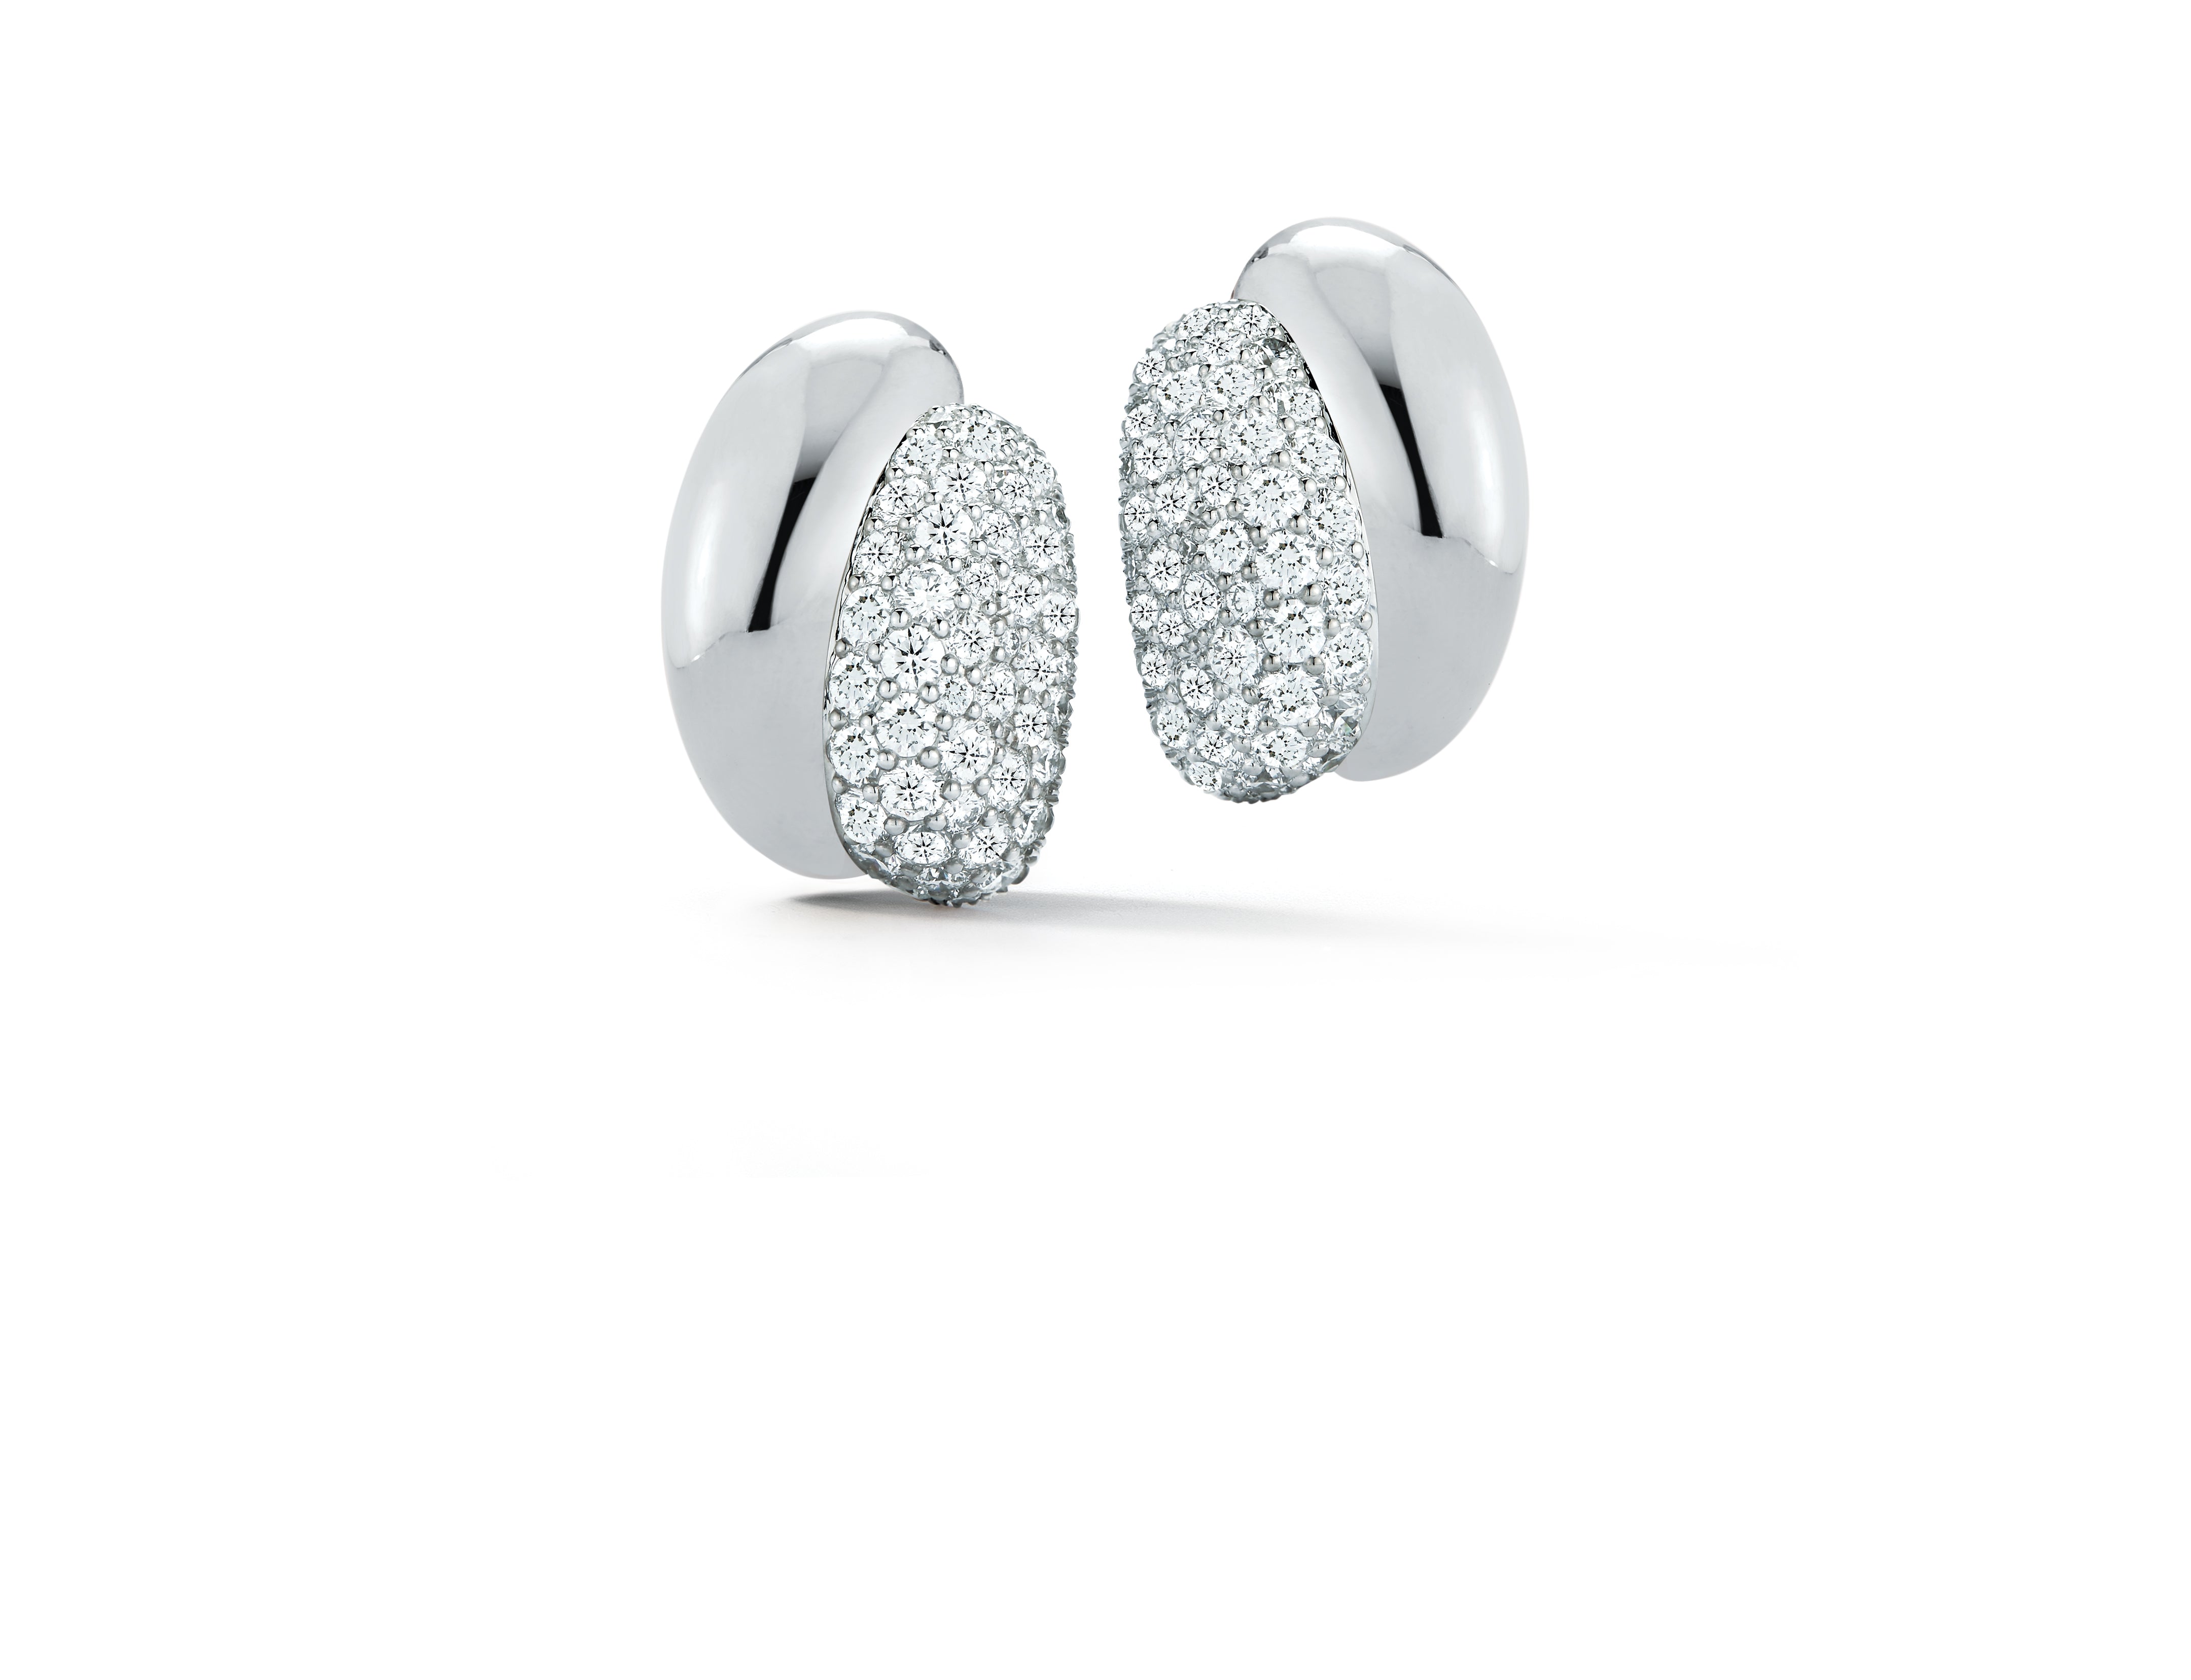 Silhouette Earrings in White Gold & Pave Diamond